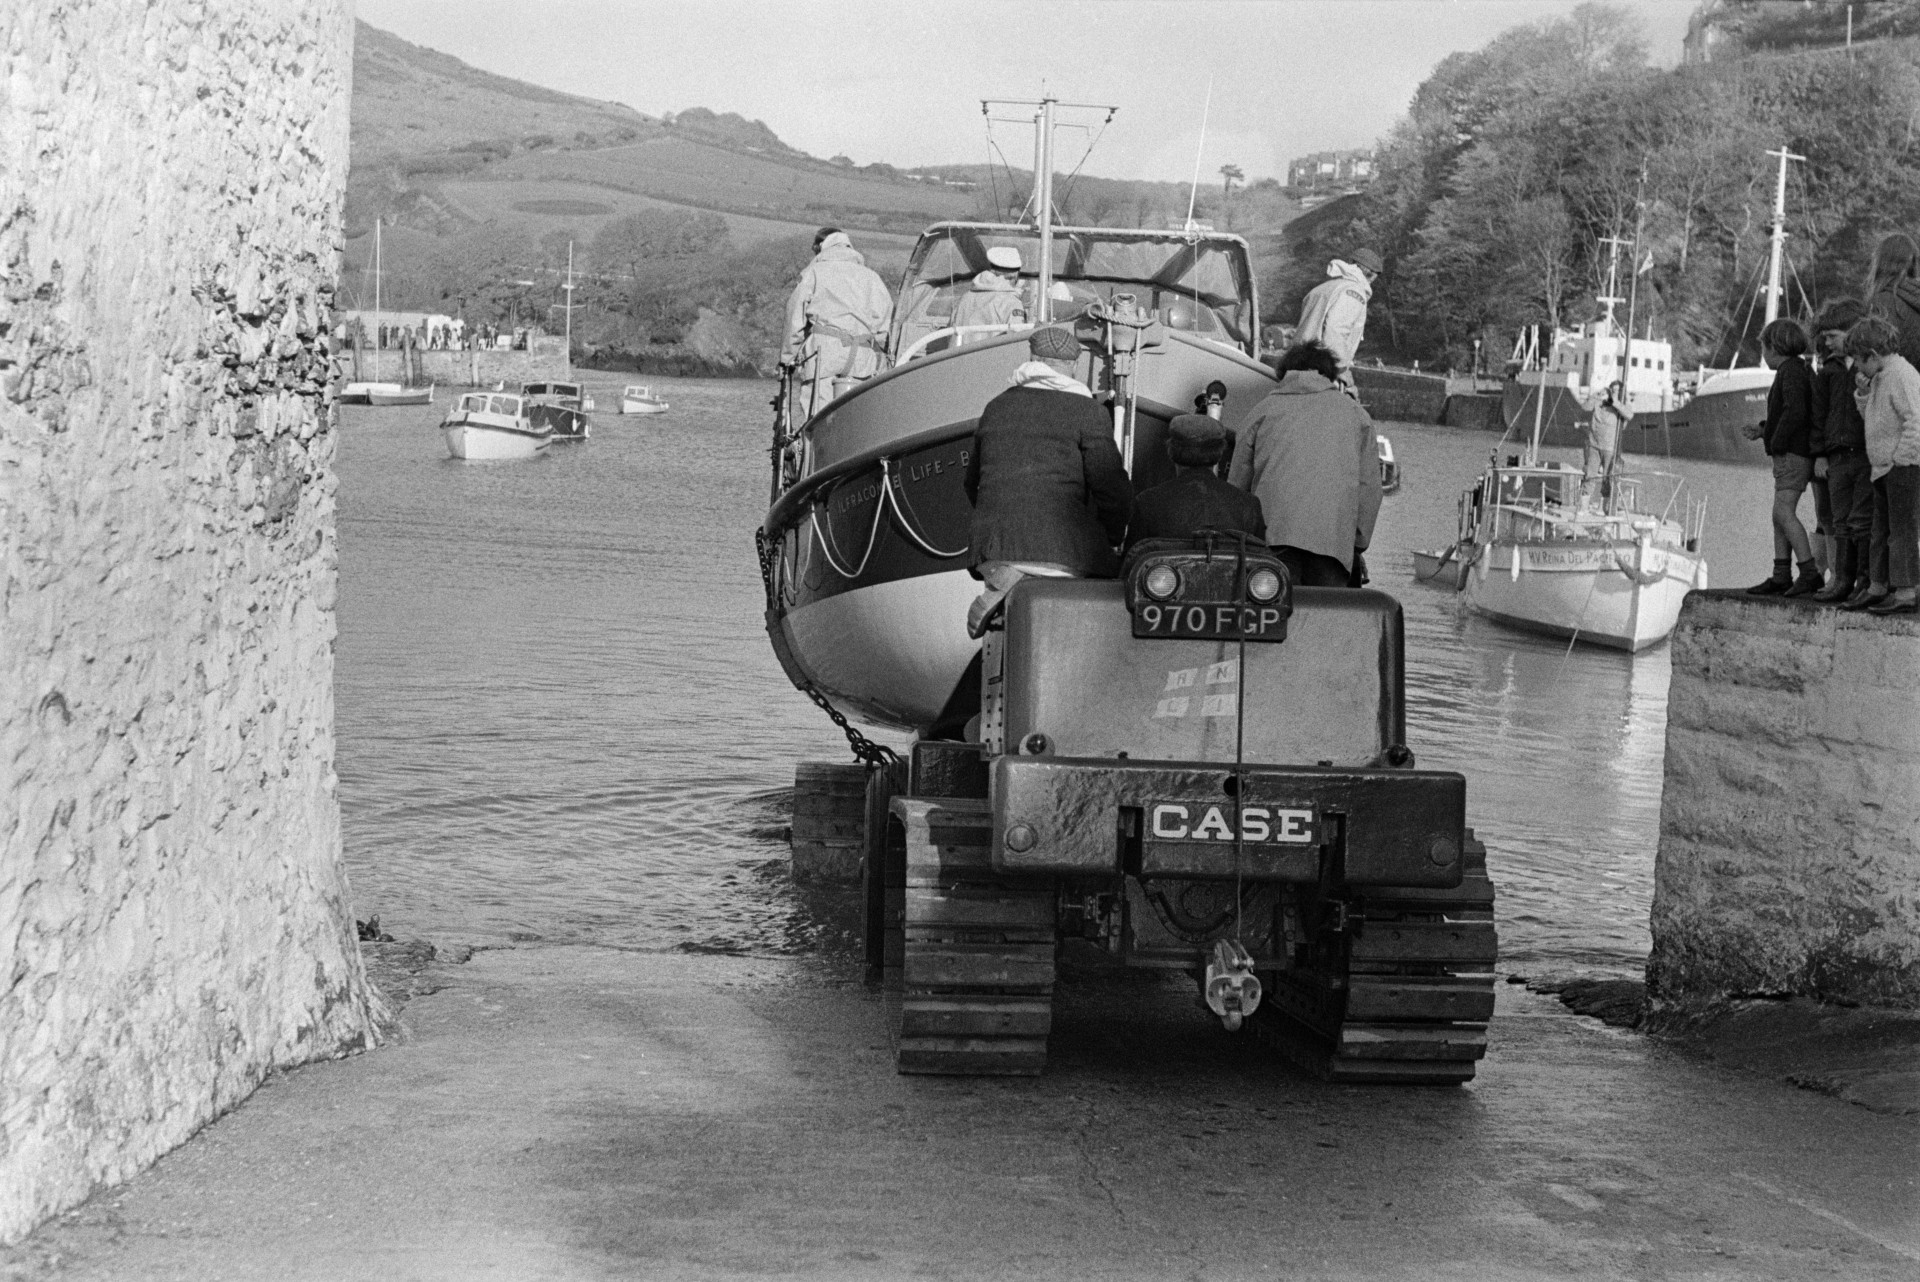 Men launching a life boat into the harbour at Ilfracombe, using a vehicle with caterpillar tracks.  A group of children are watching by the harbour wall.